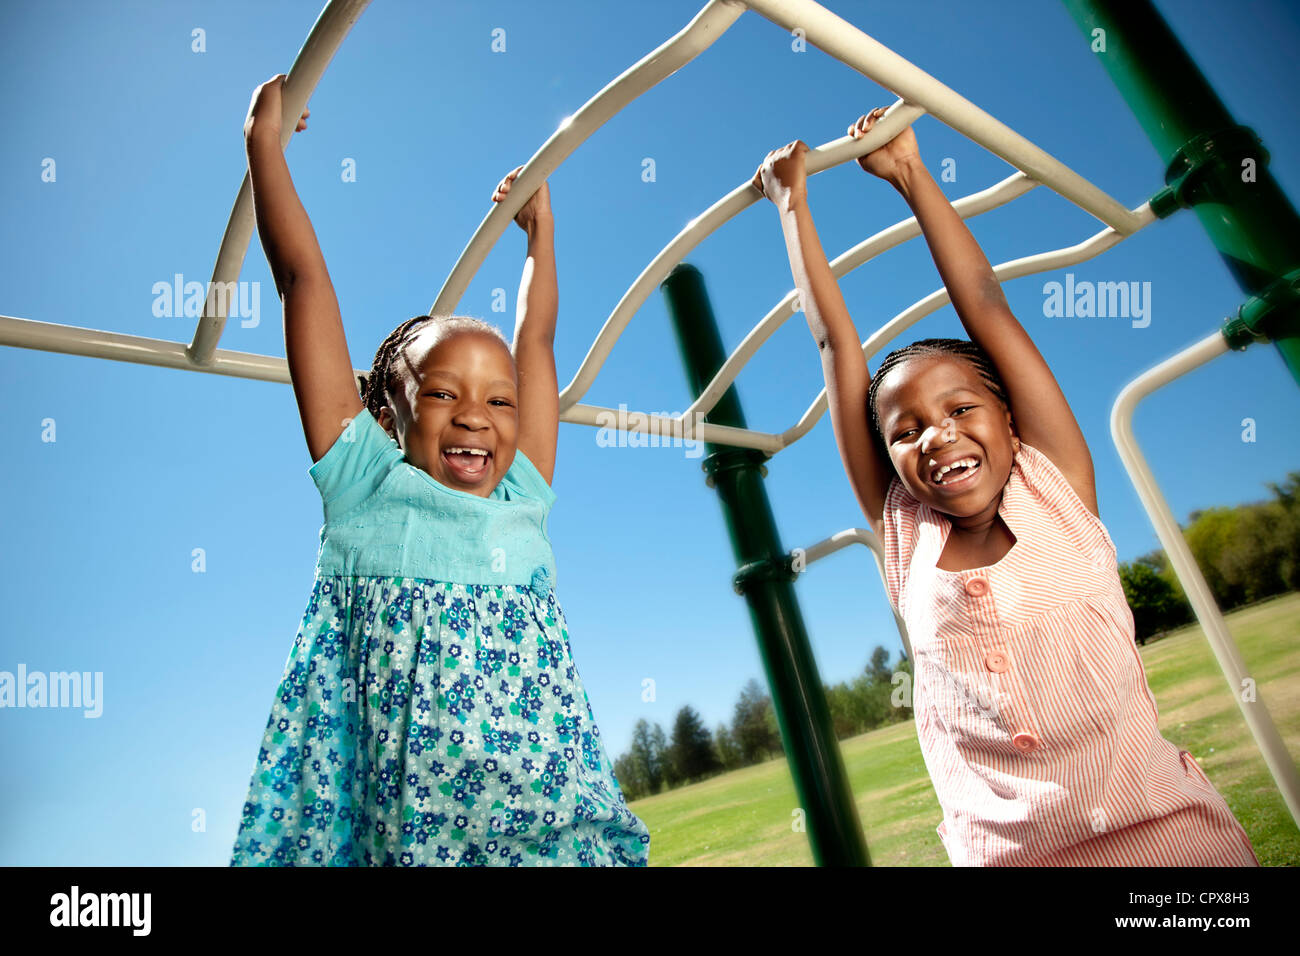 Two children hanging from monkey bars in a playground Stock Photo